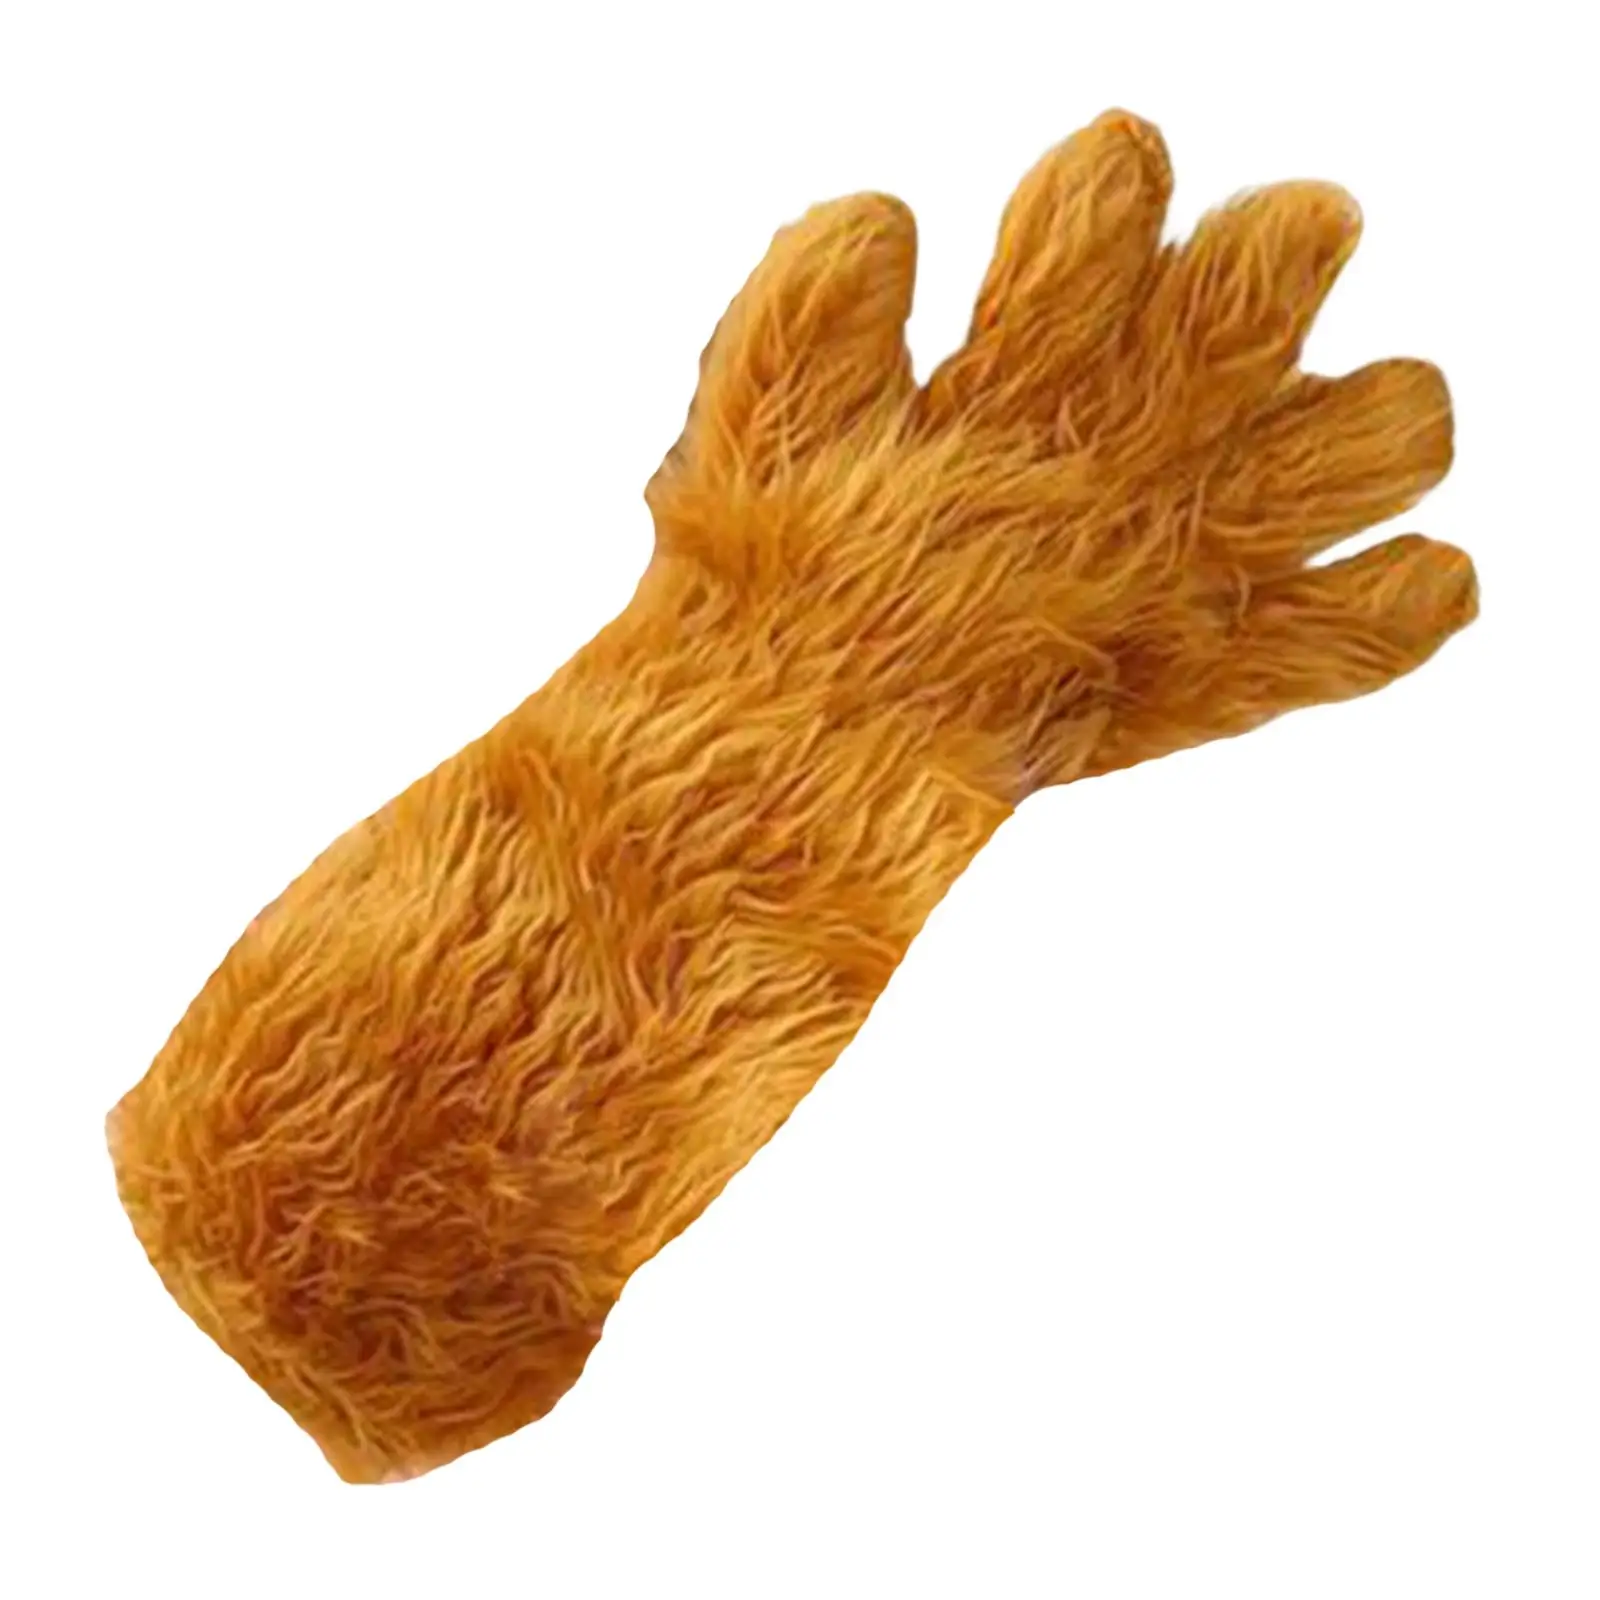 Paw Gloves Costume Dress Cosplay Decoration for Carnival Festival Role Play Birthday